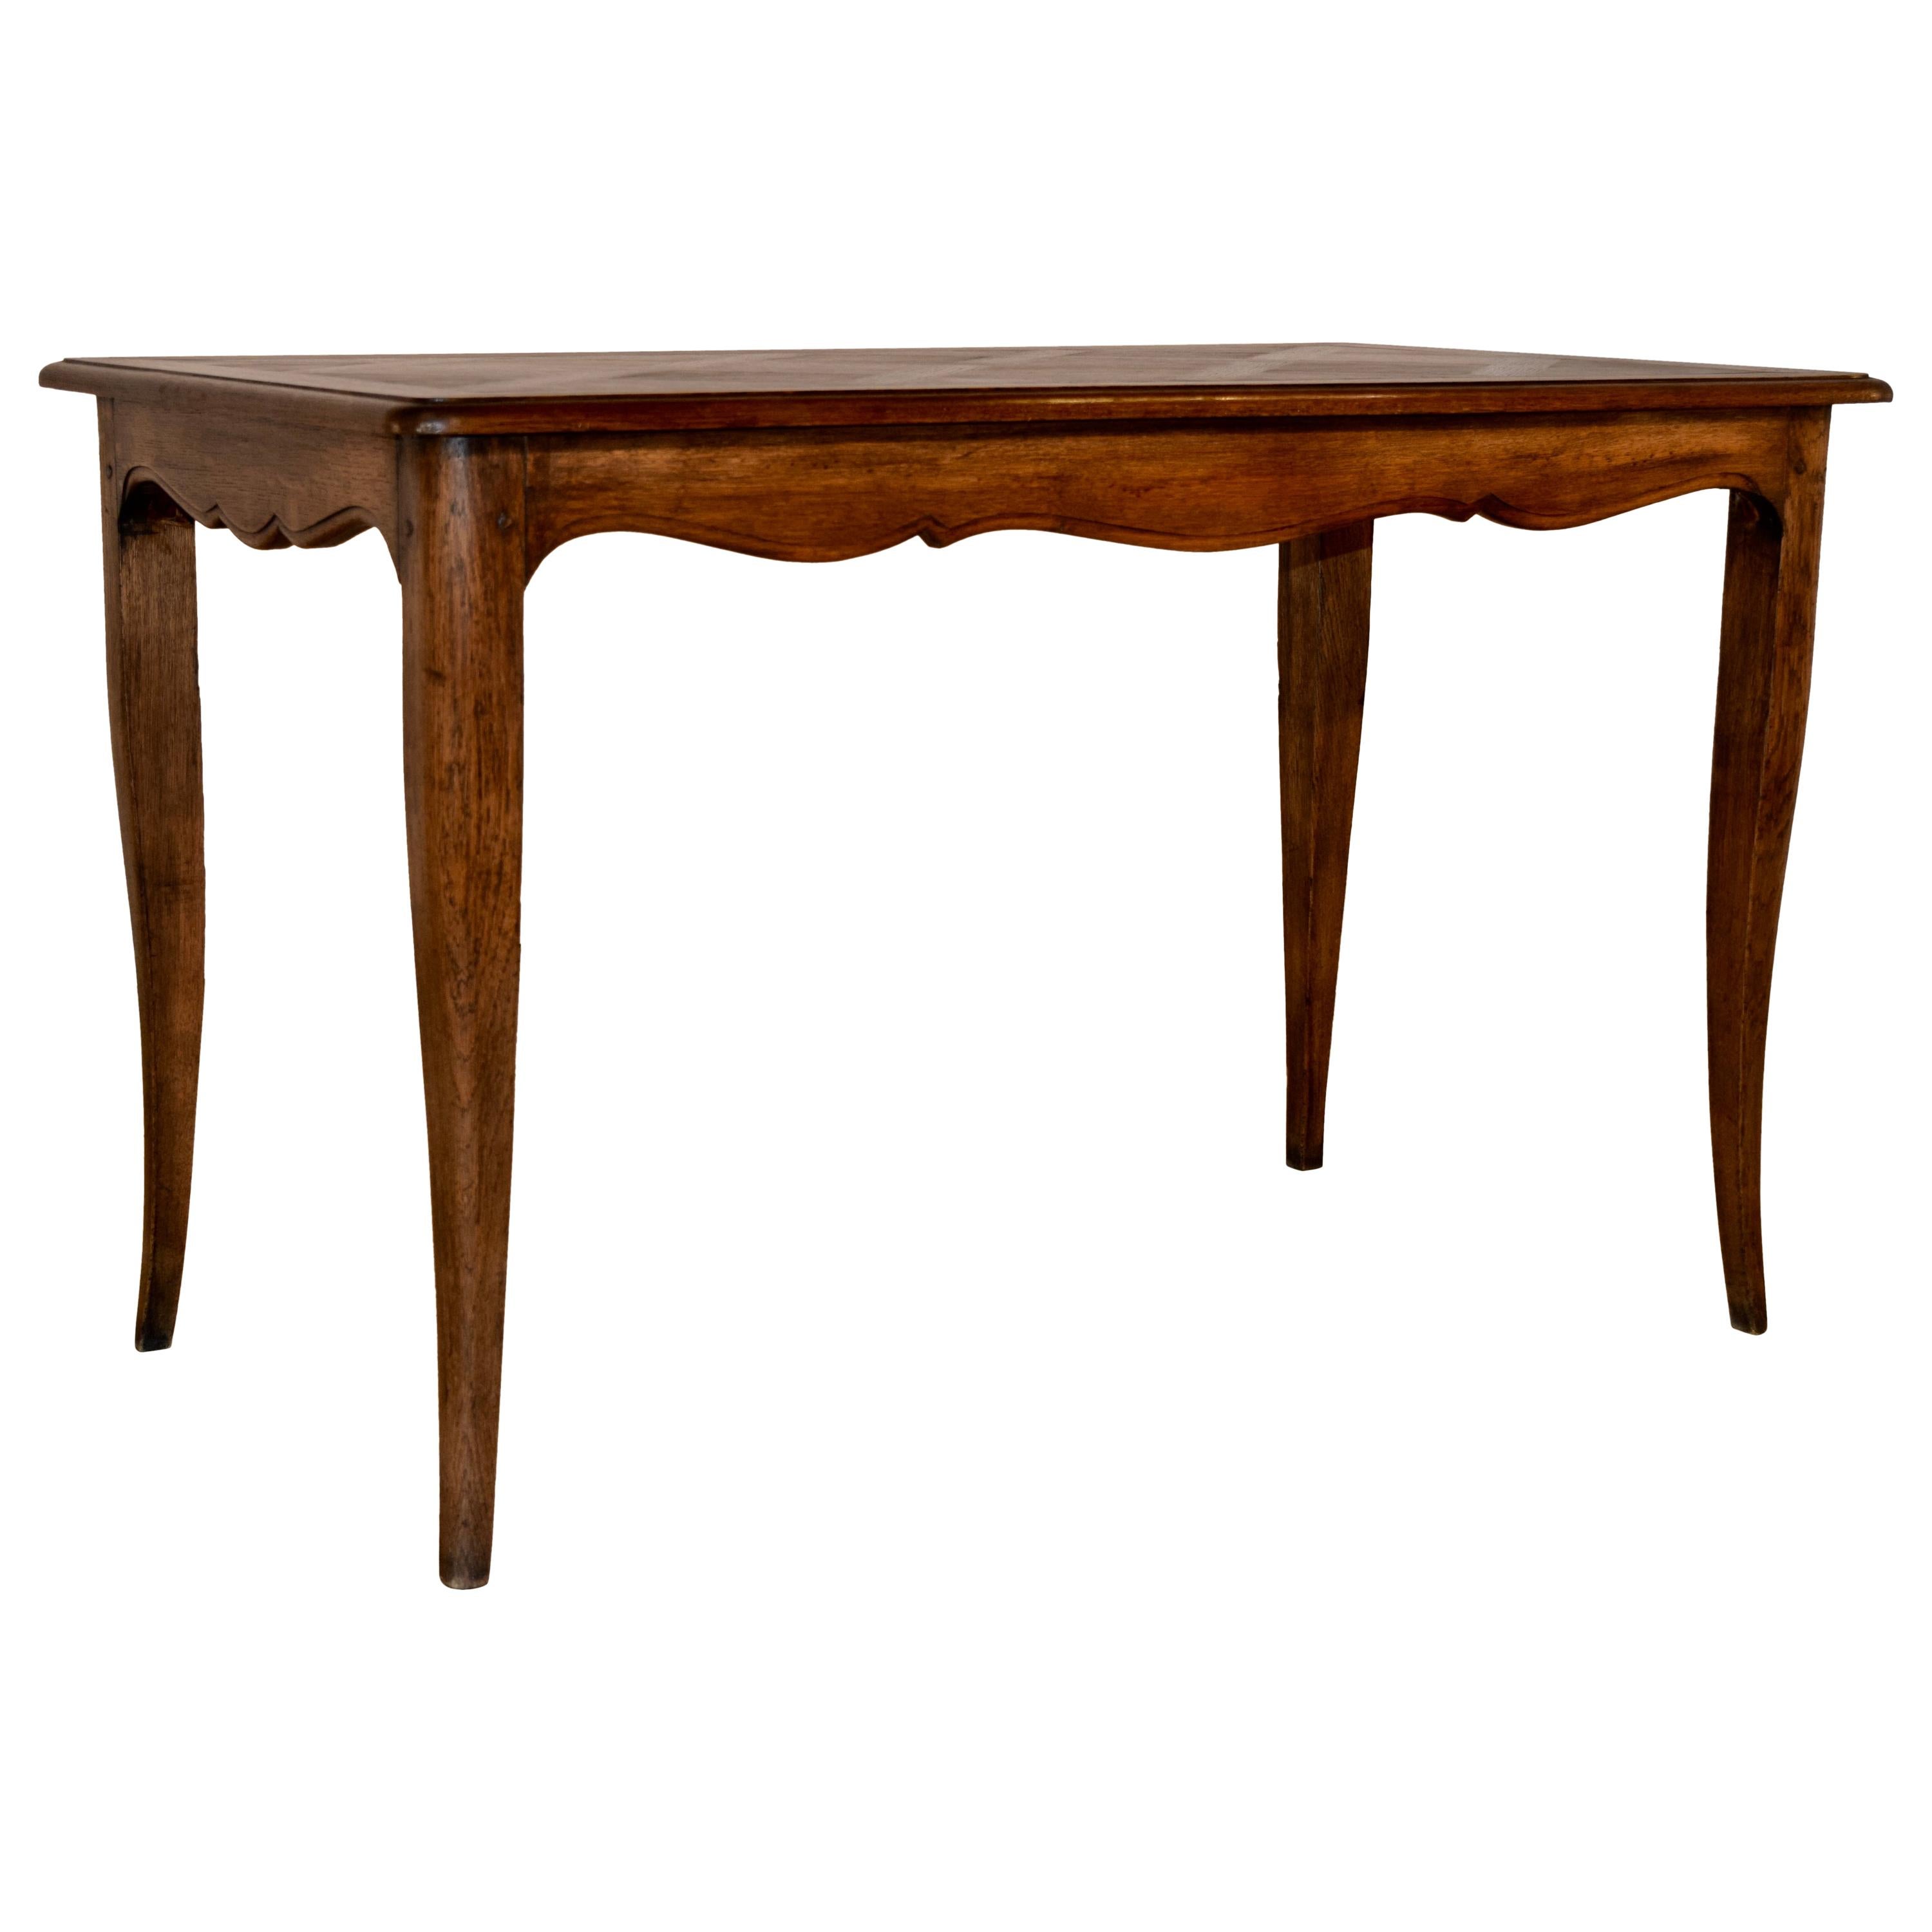 Late 19th Century Table with Parquetry Top